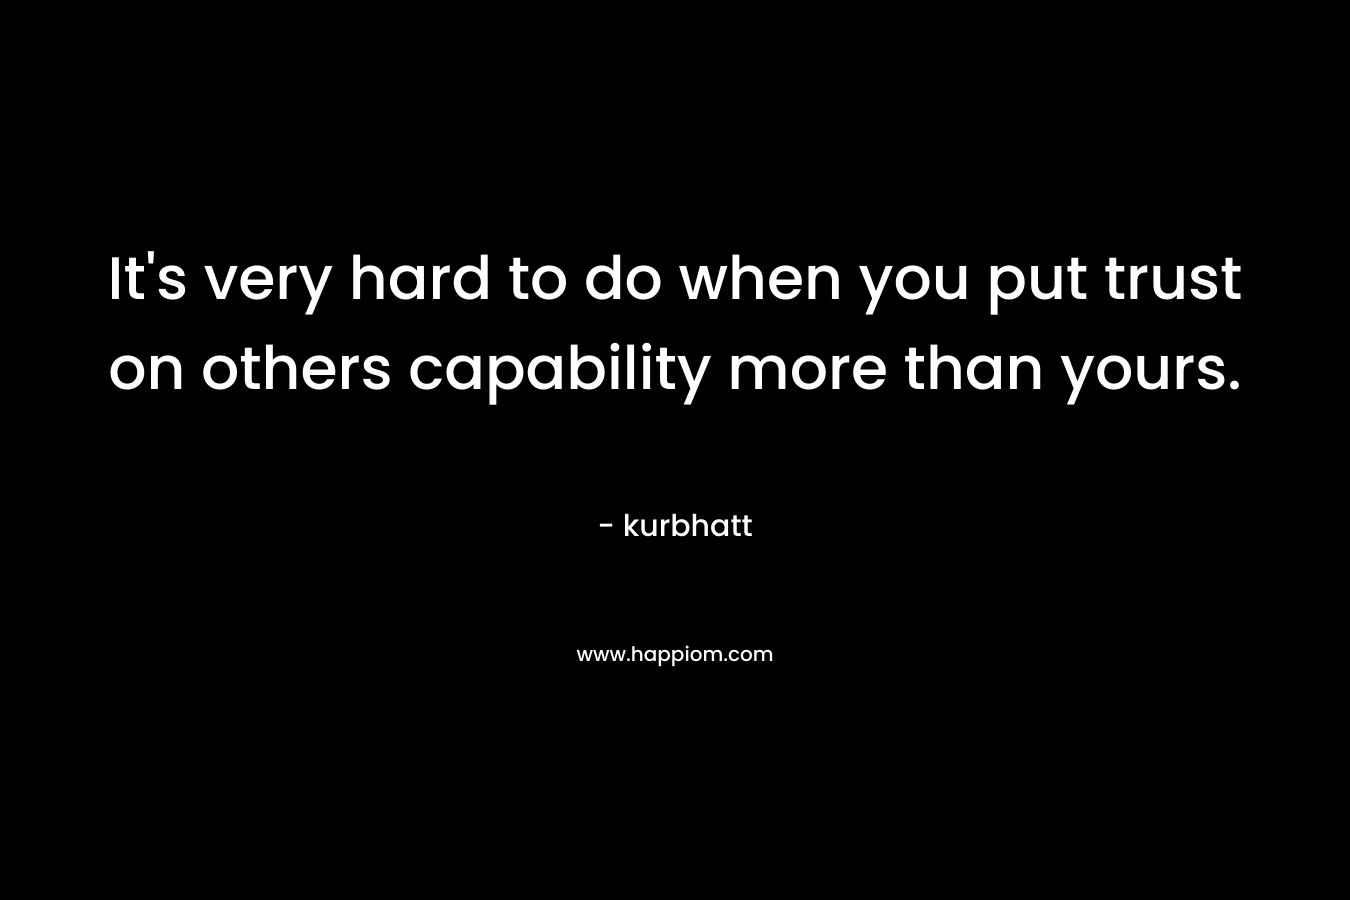 It’s very hard to do when you put trust on others capability more than yours. – kurbhatt